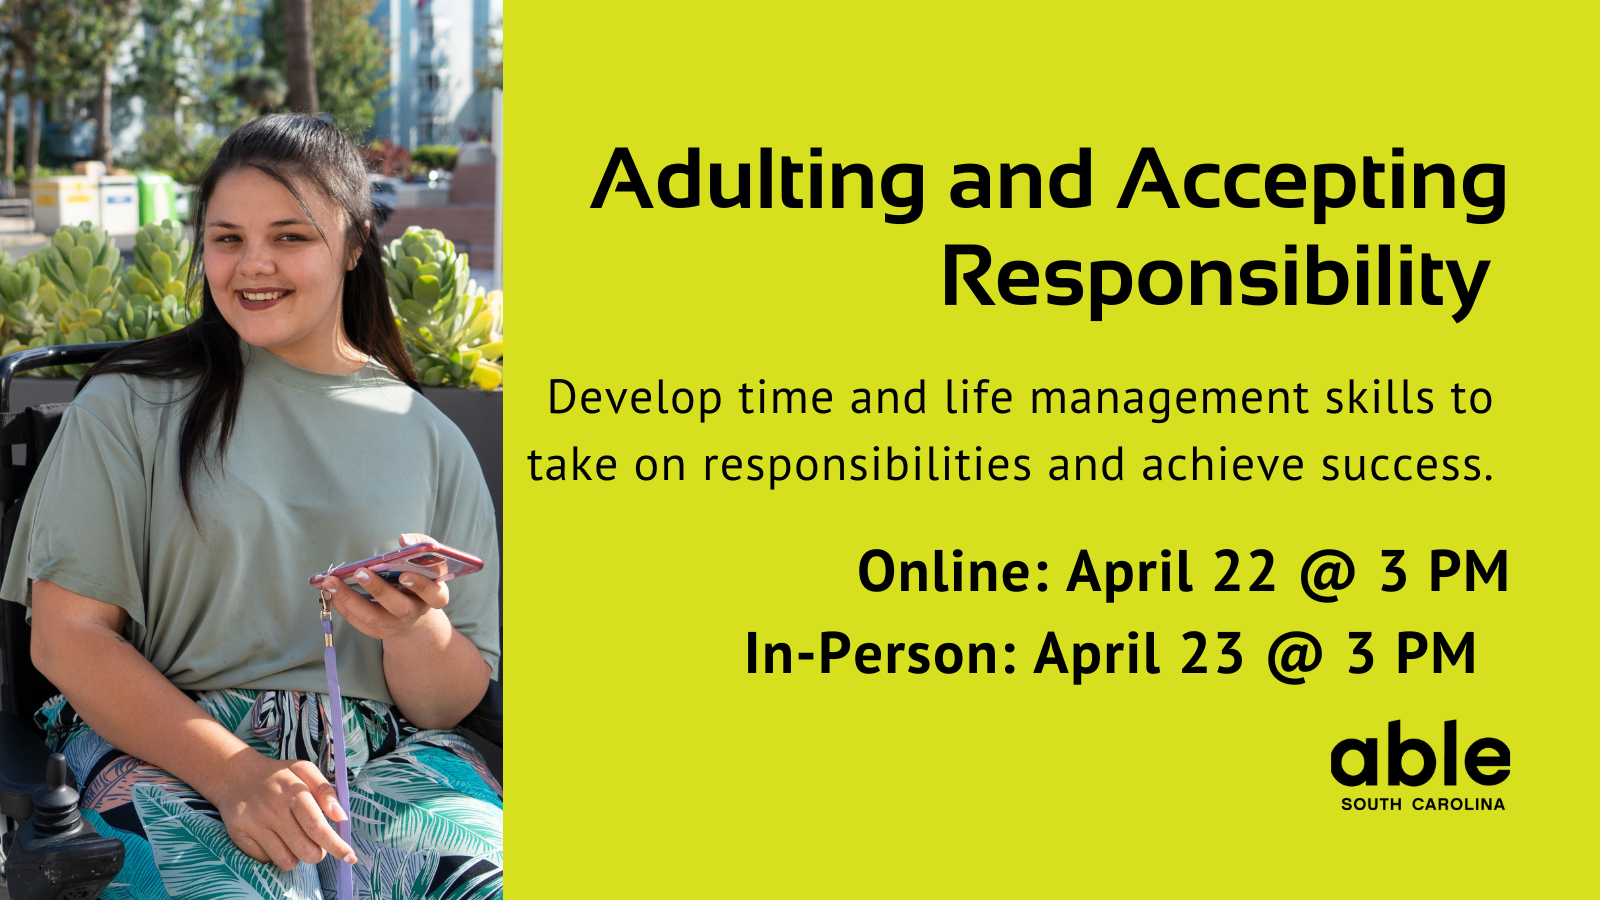 Text, 'Adulting and Accepting Responsibility. Develop time and life management skills to take on responsibilities and achieve success. Online April 22, in person the 23 at 3 pm.' Photo of a young woman in a power chair holding a smartphone. Able SC logo.